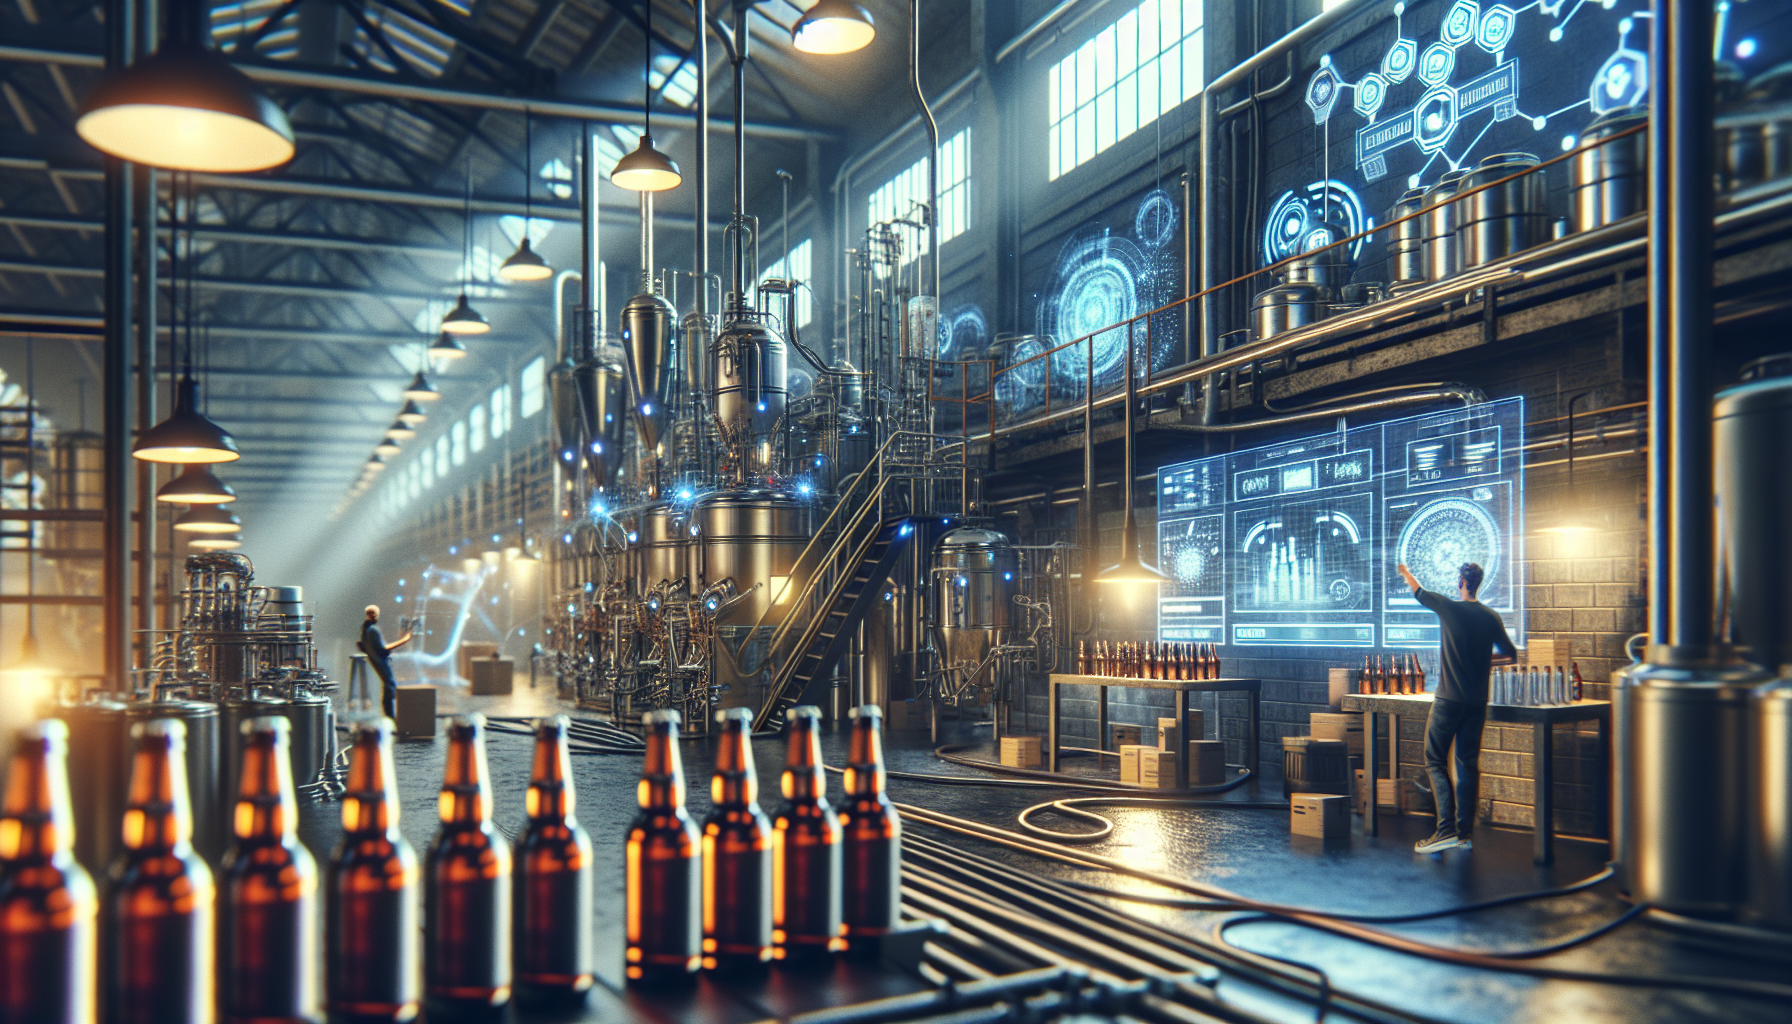 How is Beer Innovation Revolutionizing the Brewing Industry?